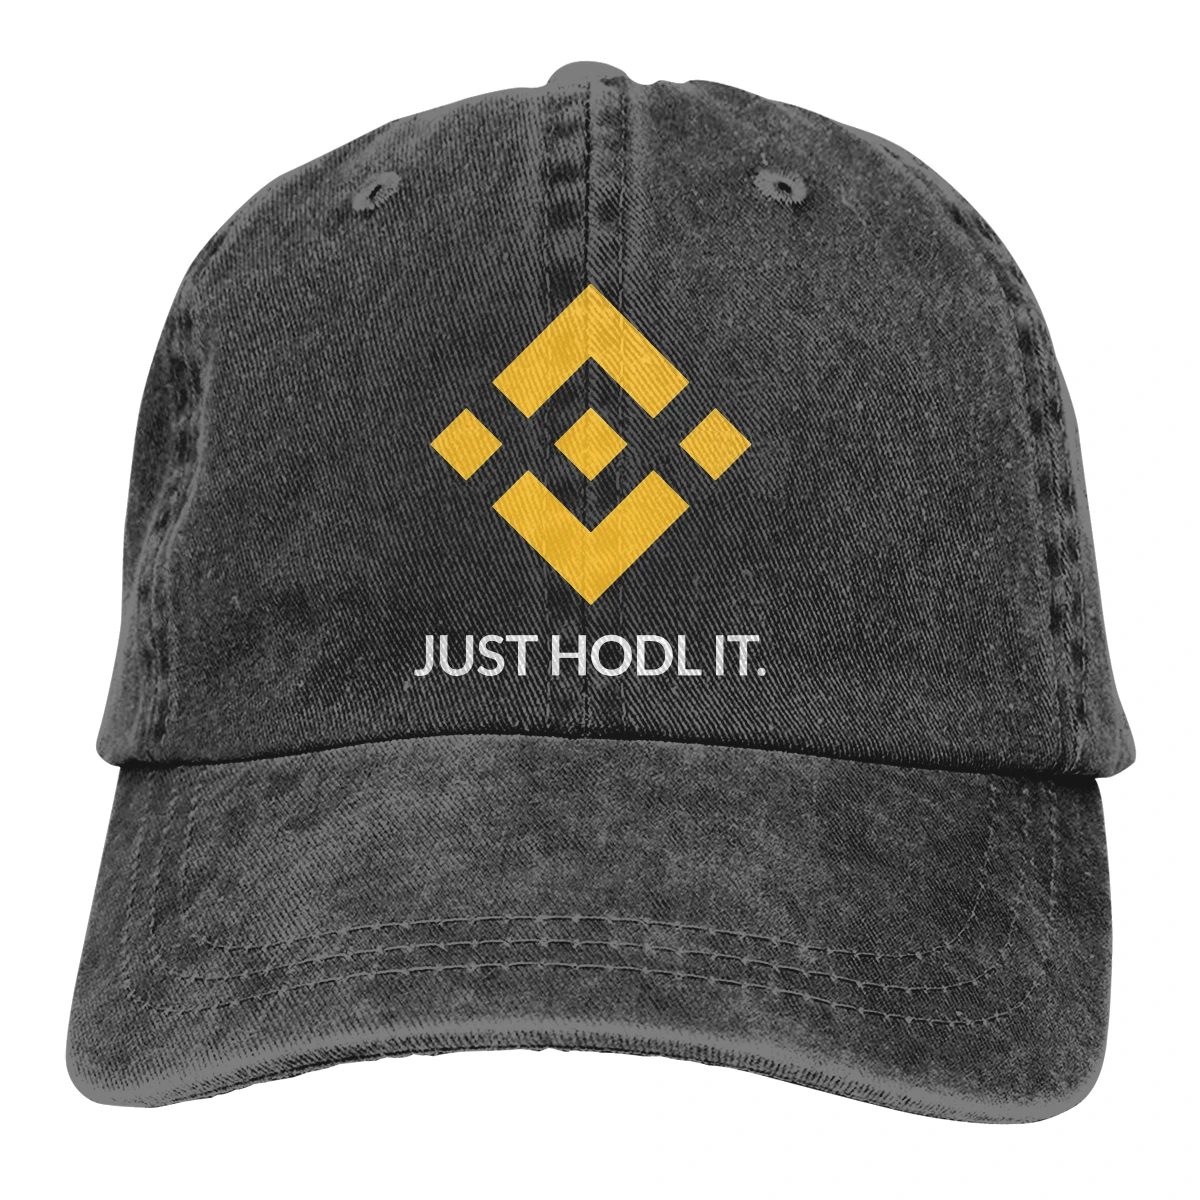 

Binance Coin Crypto Miners Multicolor Hat Peaked Women's Cap BNB Hodl Personalized Visor Protection Hats